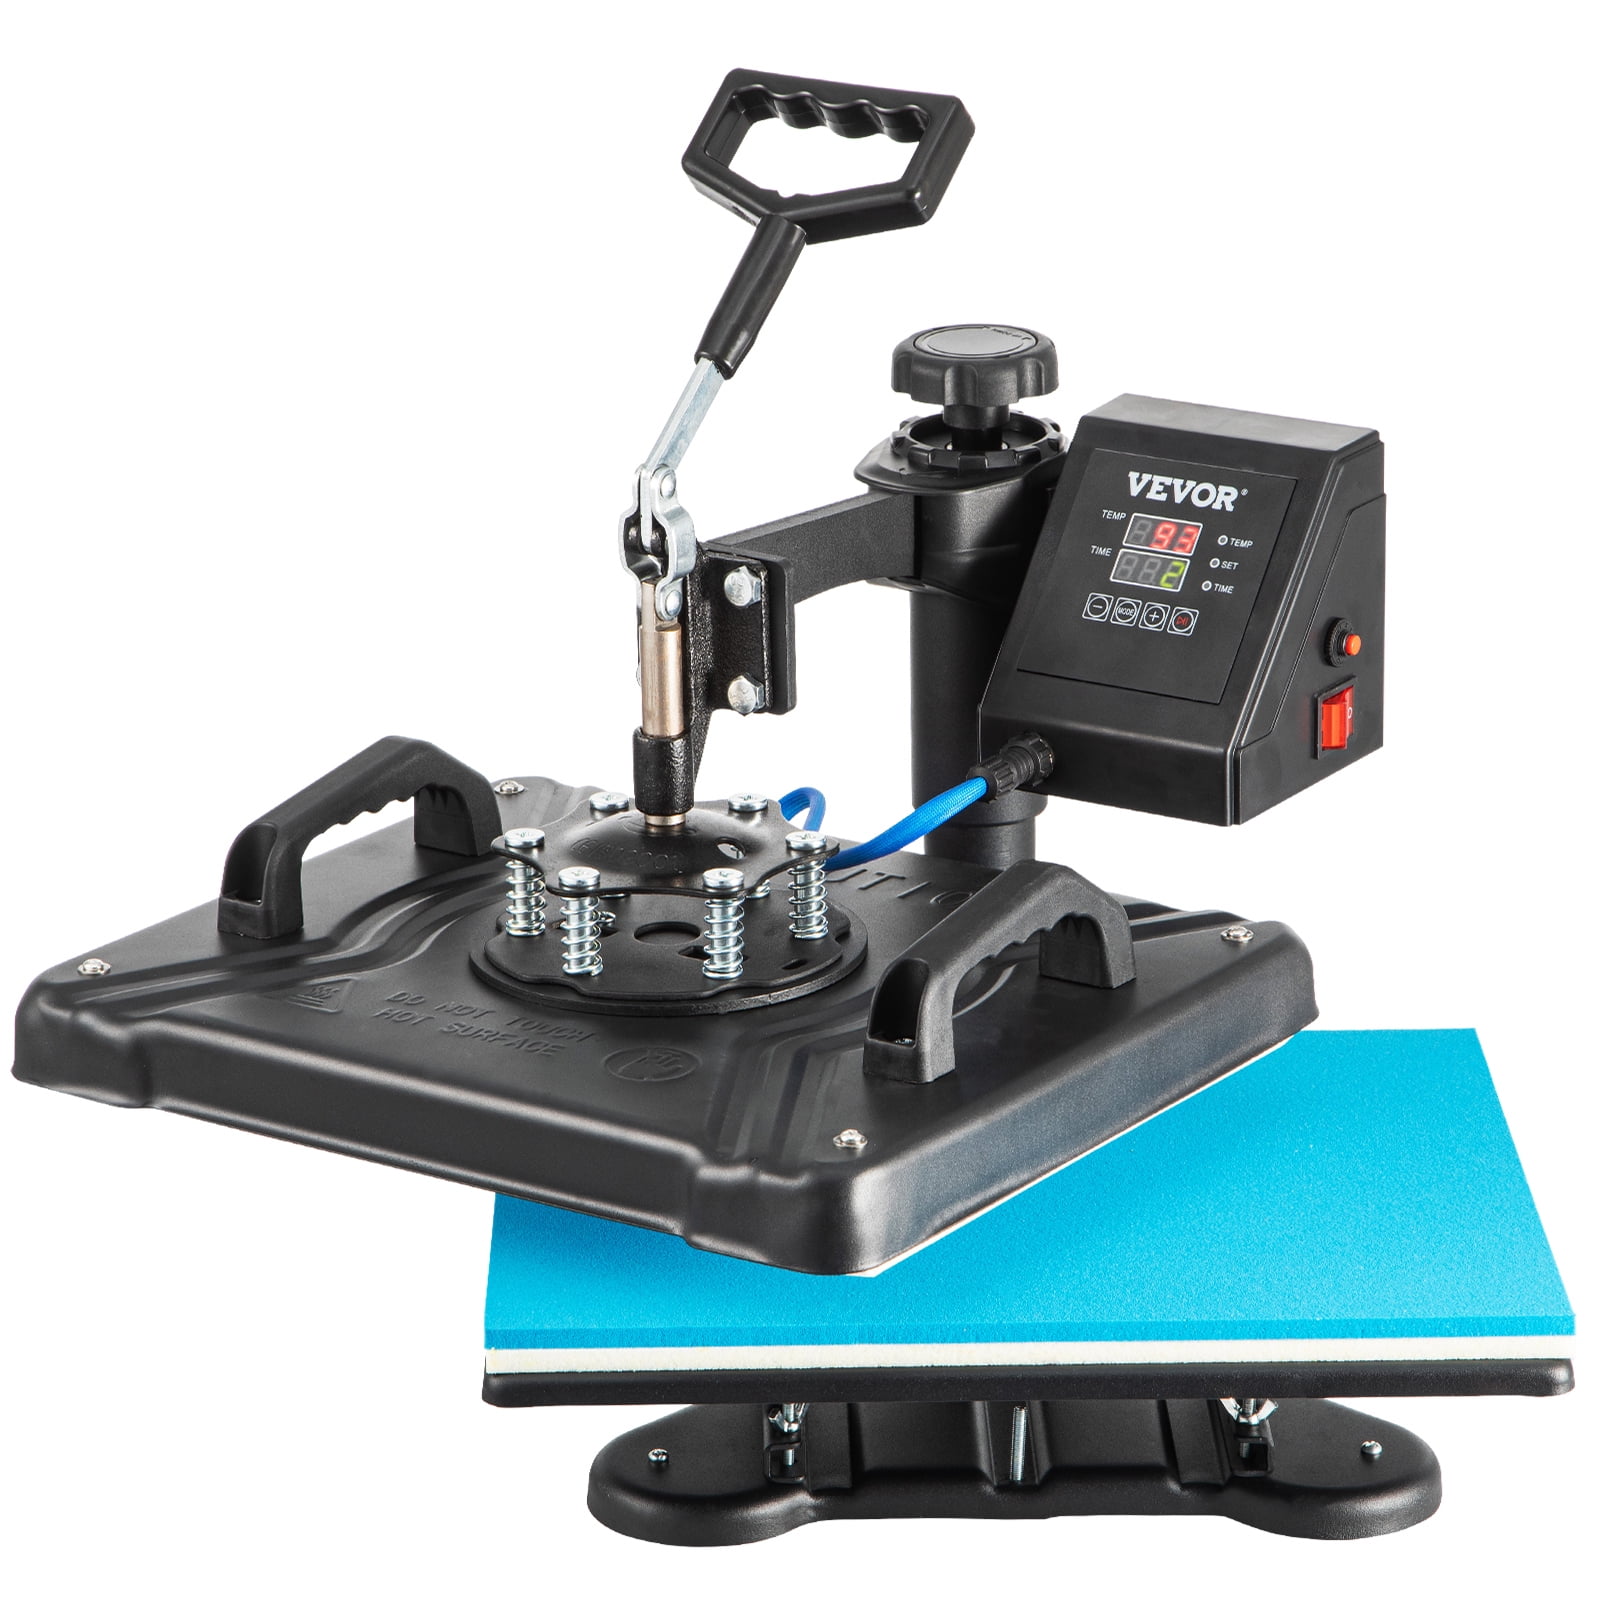 VEVOR 12 in. x 15 in. Heat Press Machine 5 in 1 Sublimation Transfer  Printer 360° Rotation for Shirts/Hats/Mugs/Sublimation XKTF91012155172EDV1  - The Home Depot